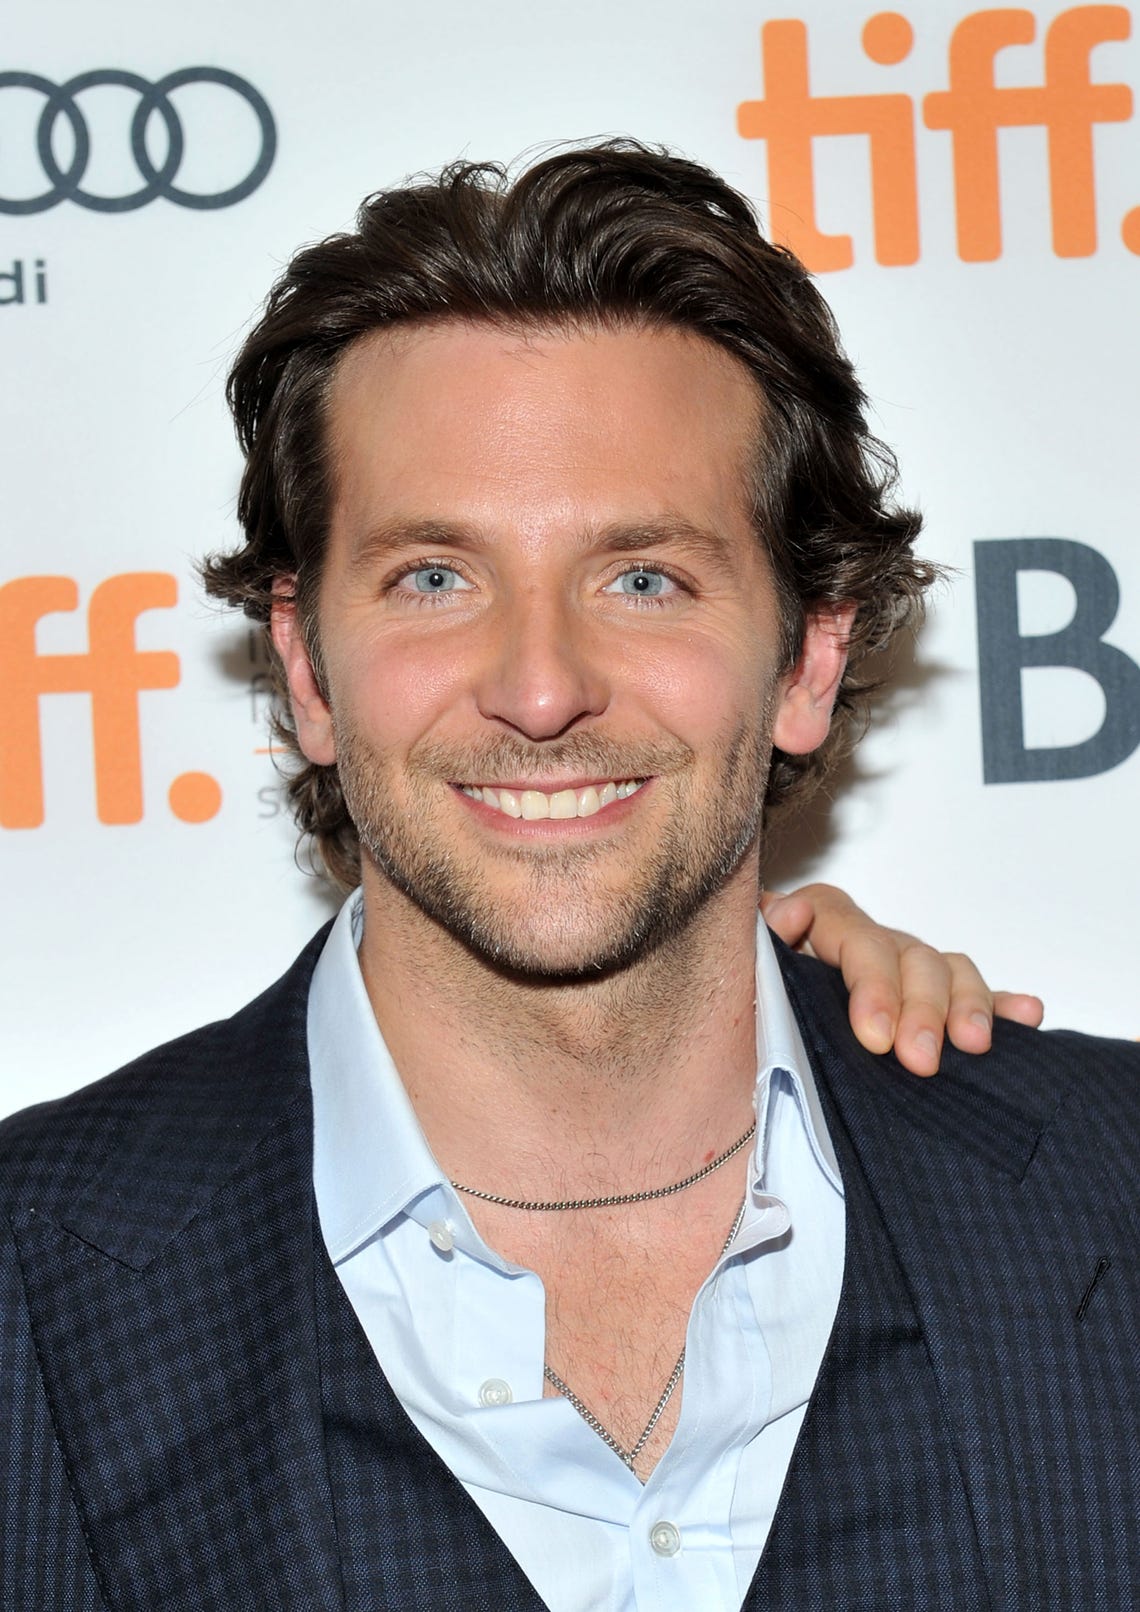 Join The Gossip: Man Candy Monday: Bradley Cooper